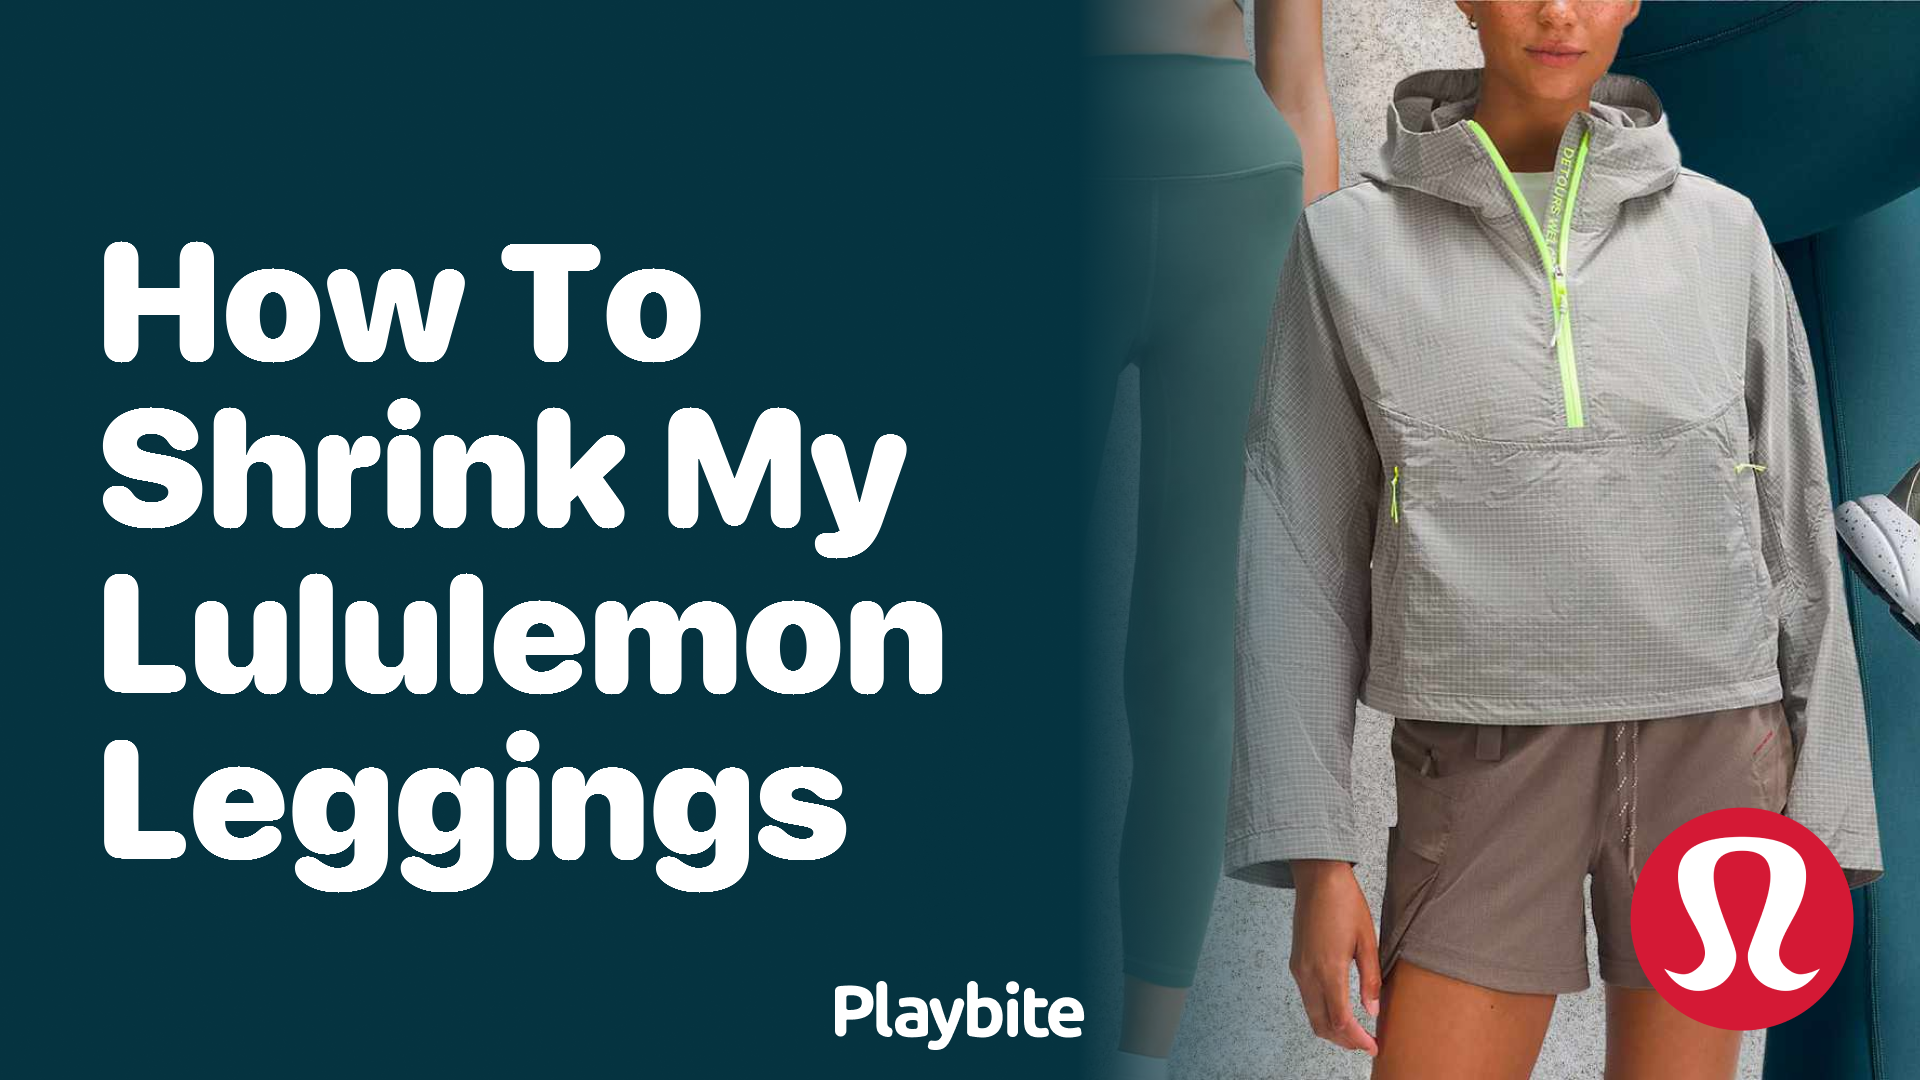 How to Shrink My Lululemon Leggings: A Quick Guide